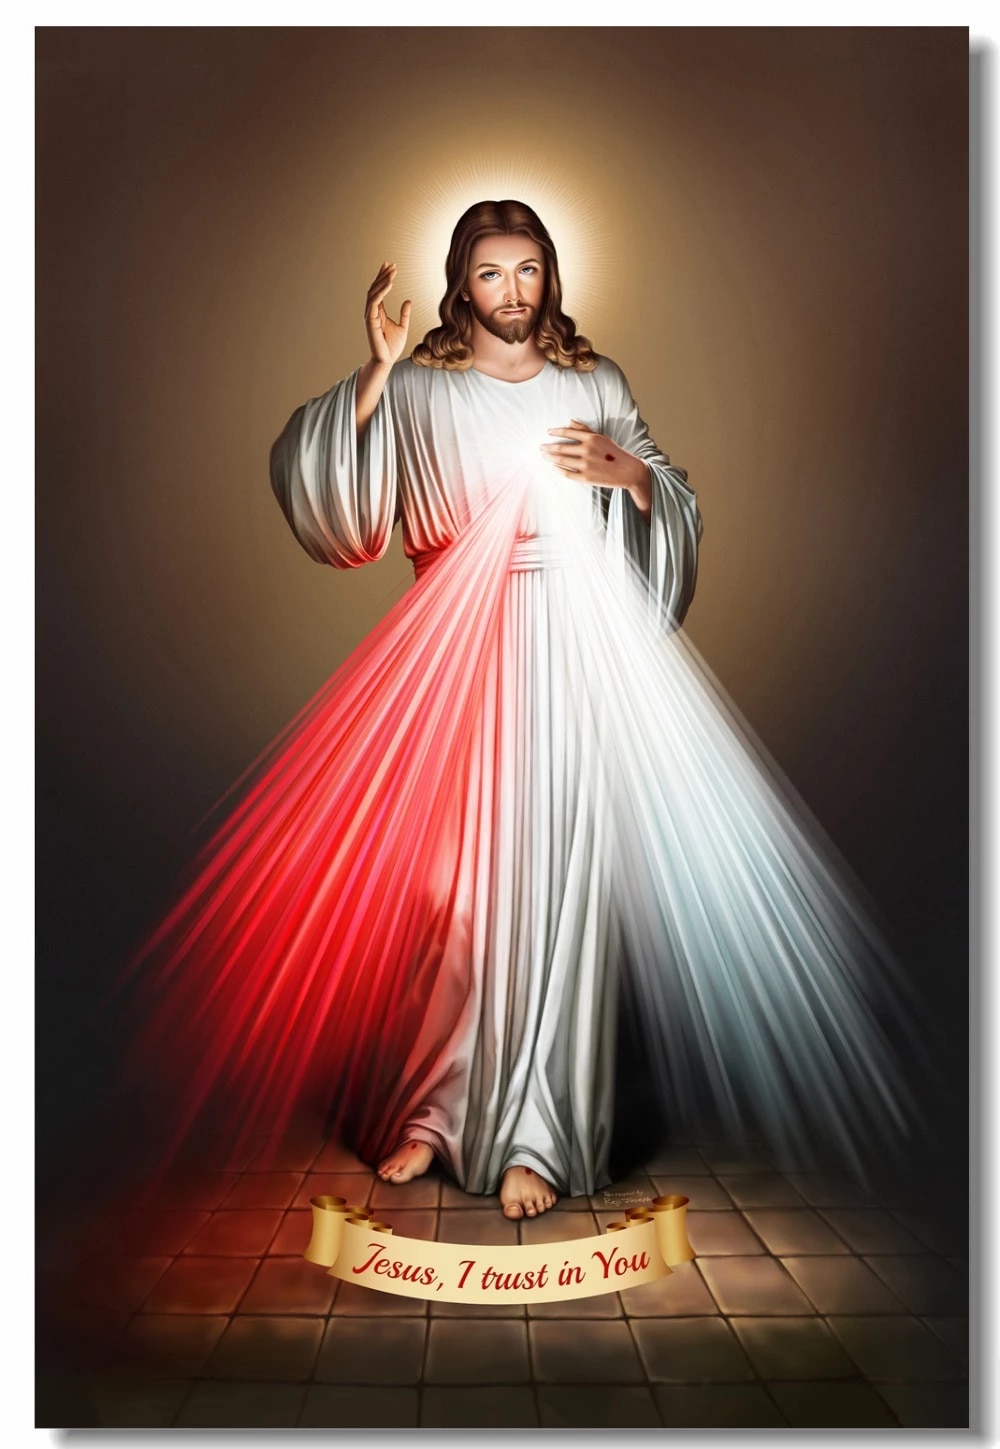 Custom Printing Canvas Wall Decor Mercy of Jesus Poster God Bless Wall Stickers Jesus I Trust In You Wallpaper Room Decor #. Wall Stickers